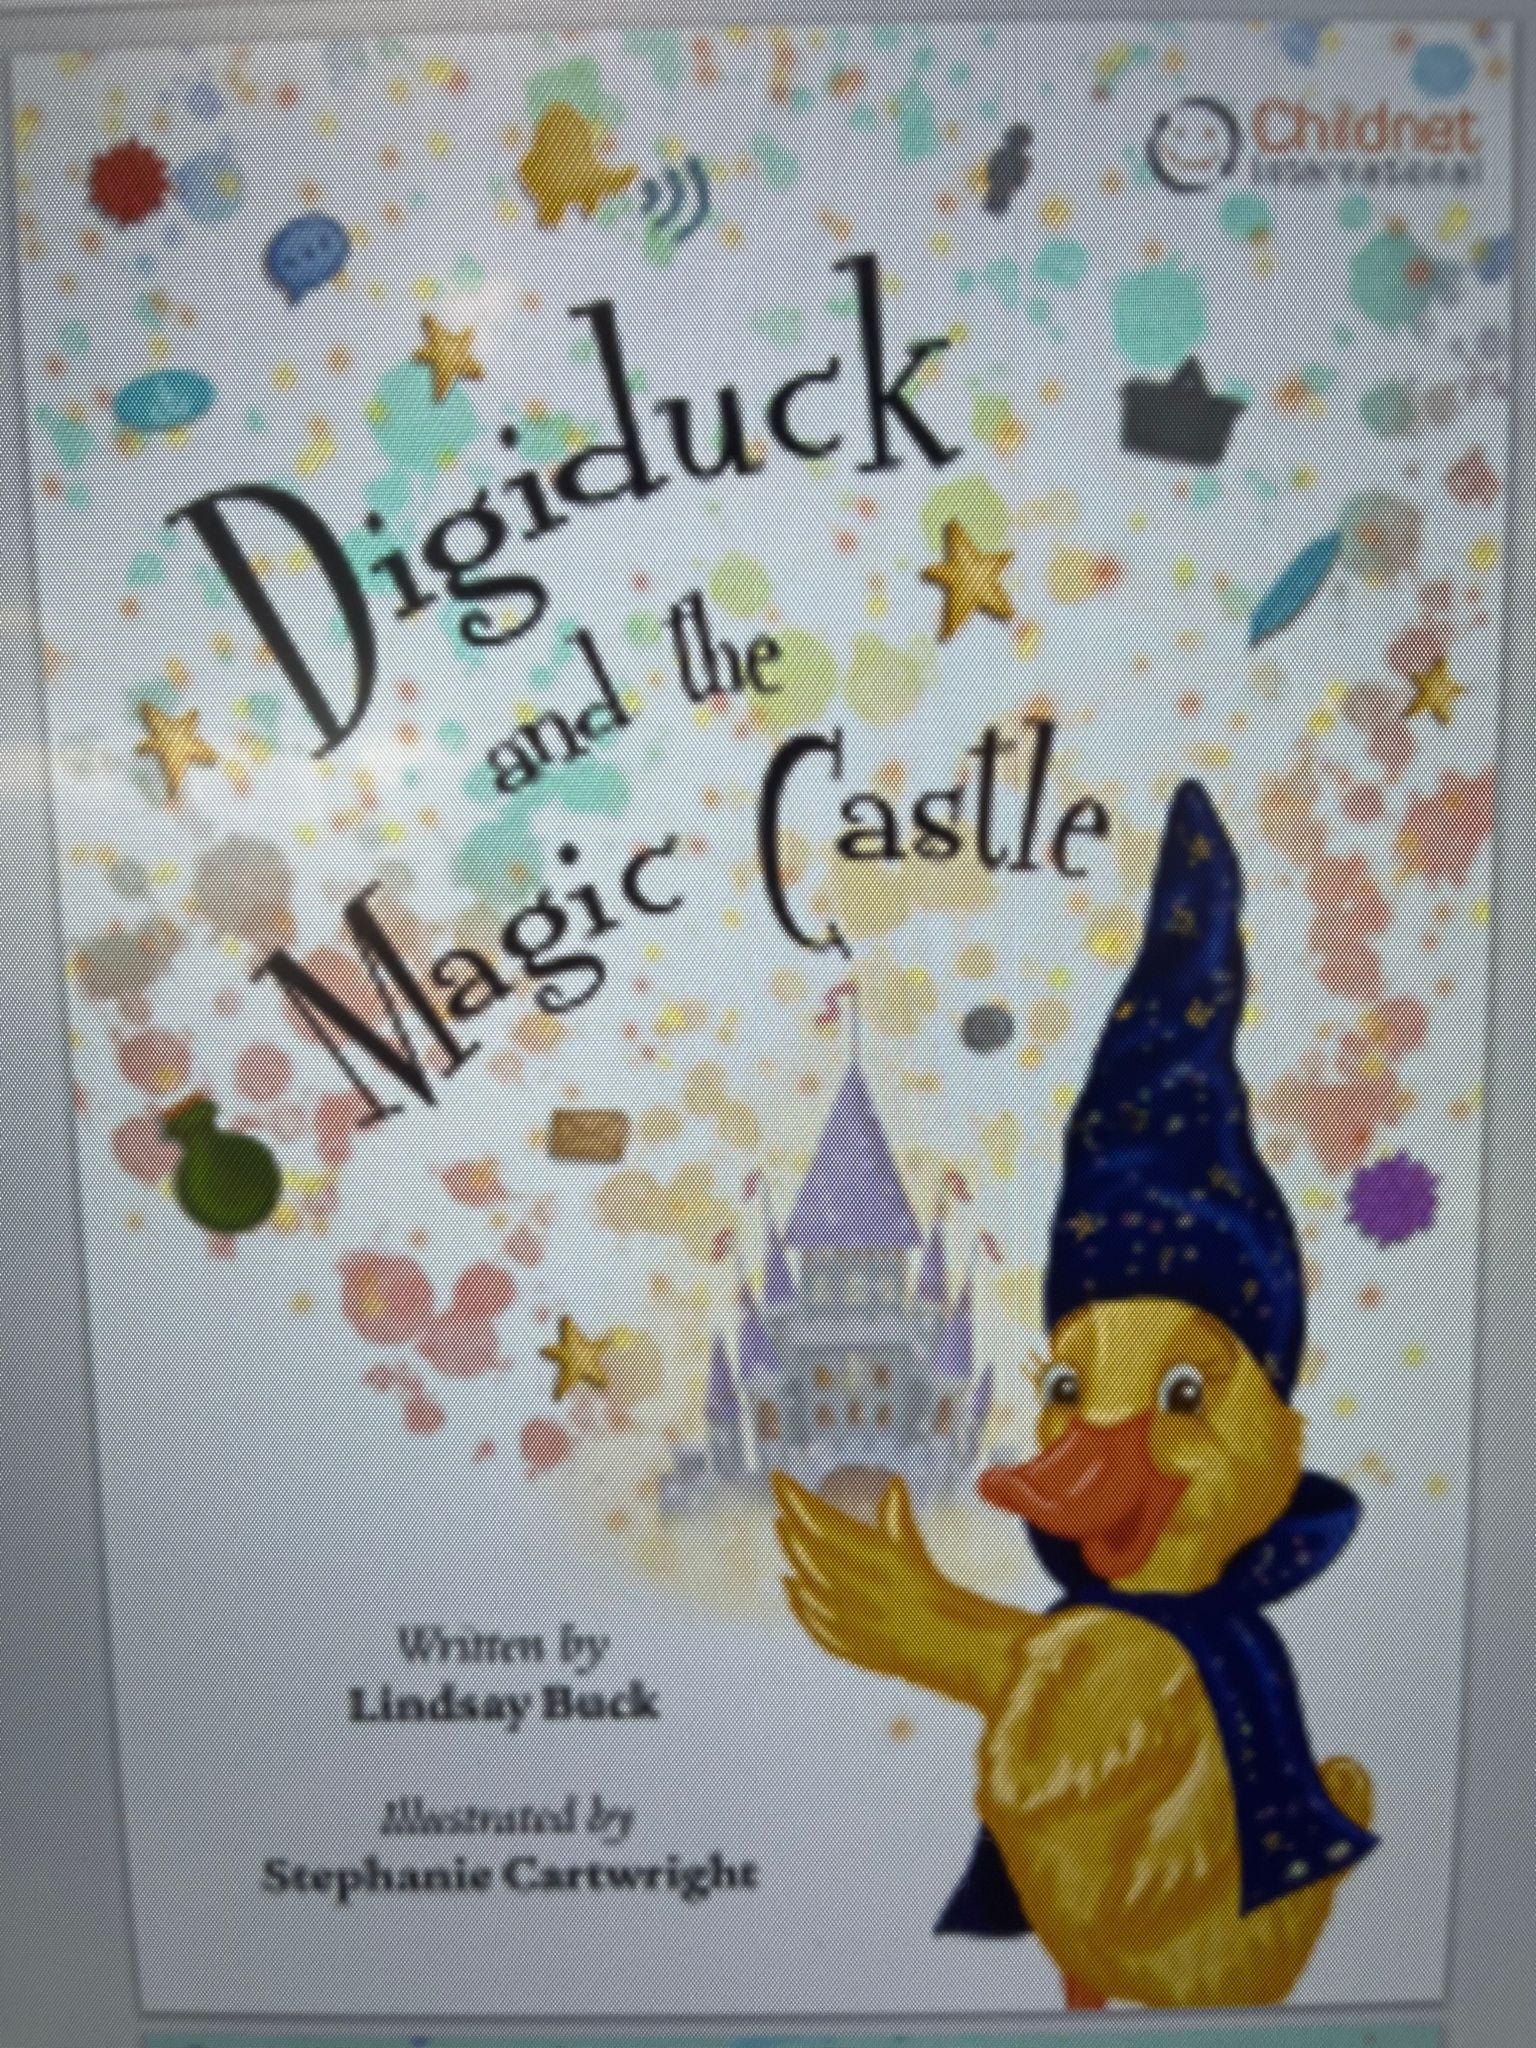 Digiduck and the Magic Castle